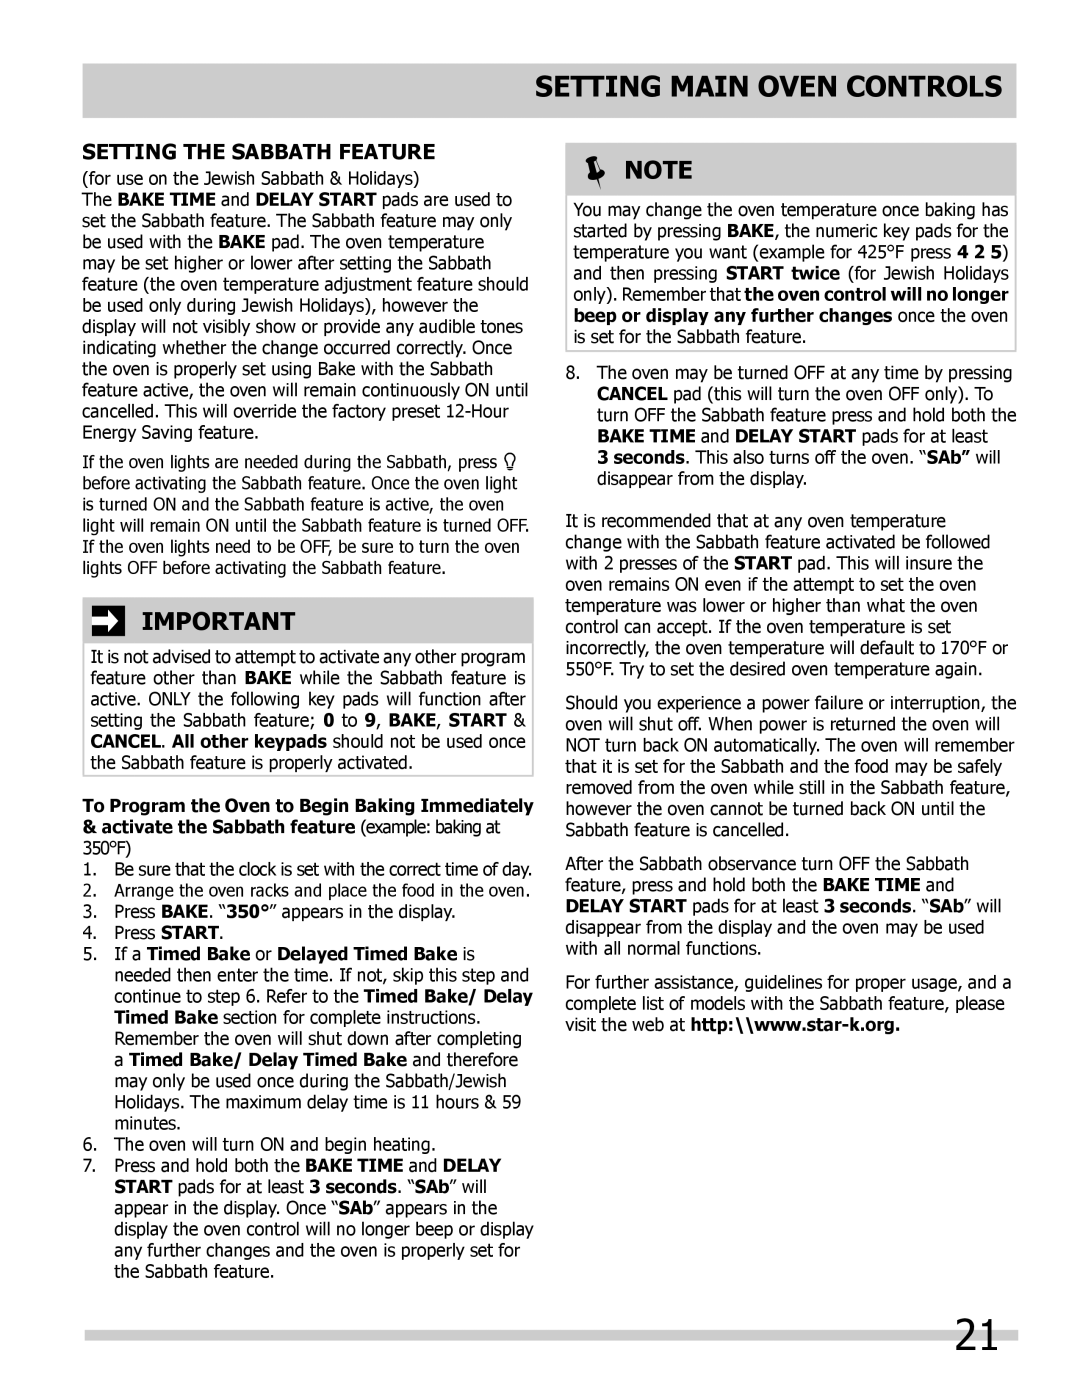 Frigidaire FPDF4085KF important safety instructions SETTING the Sabbath Feature, Setting Main Oven Controls, Note 